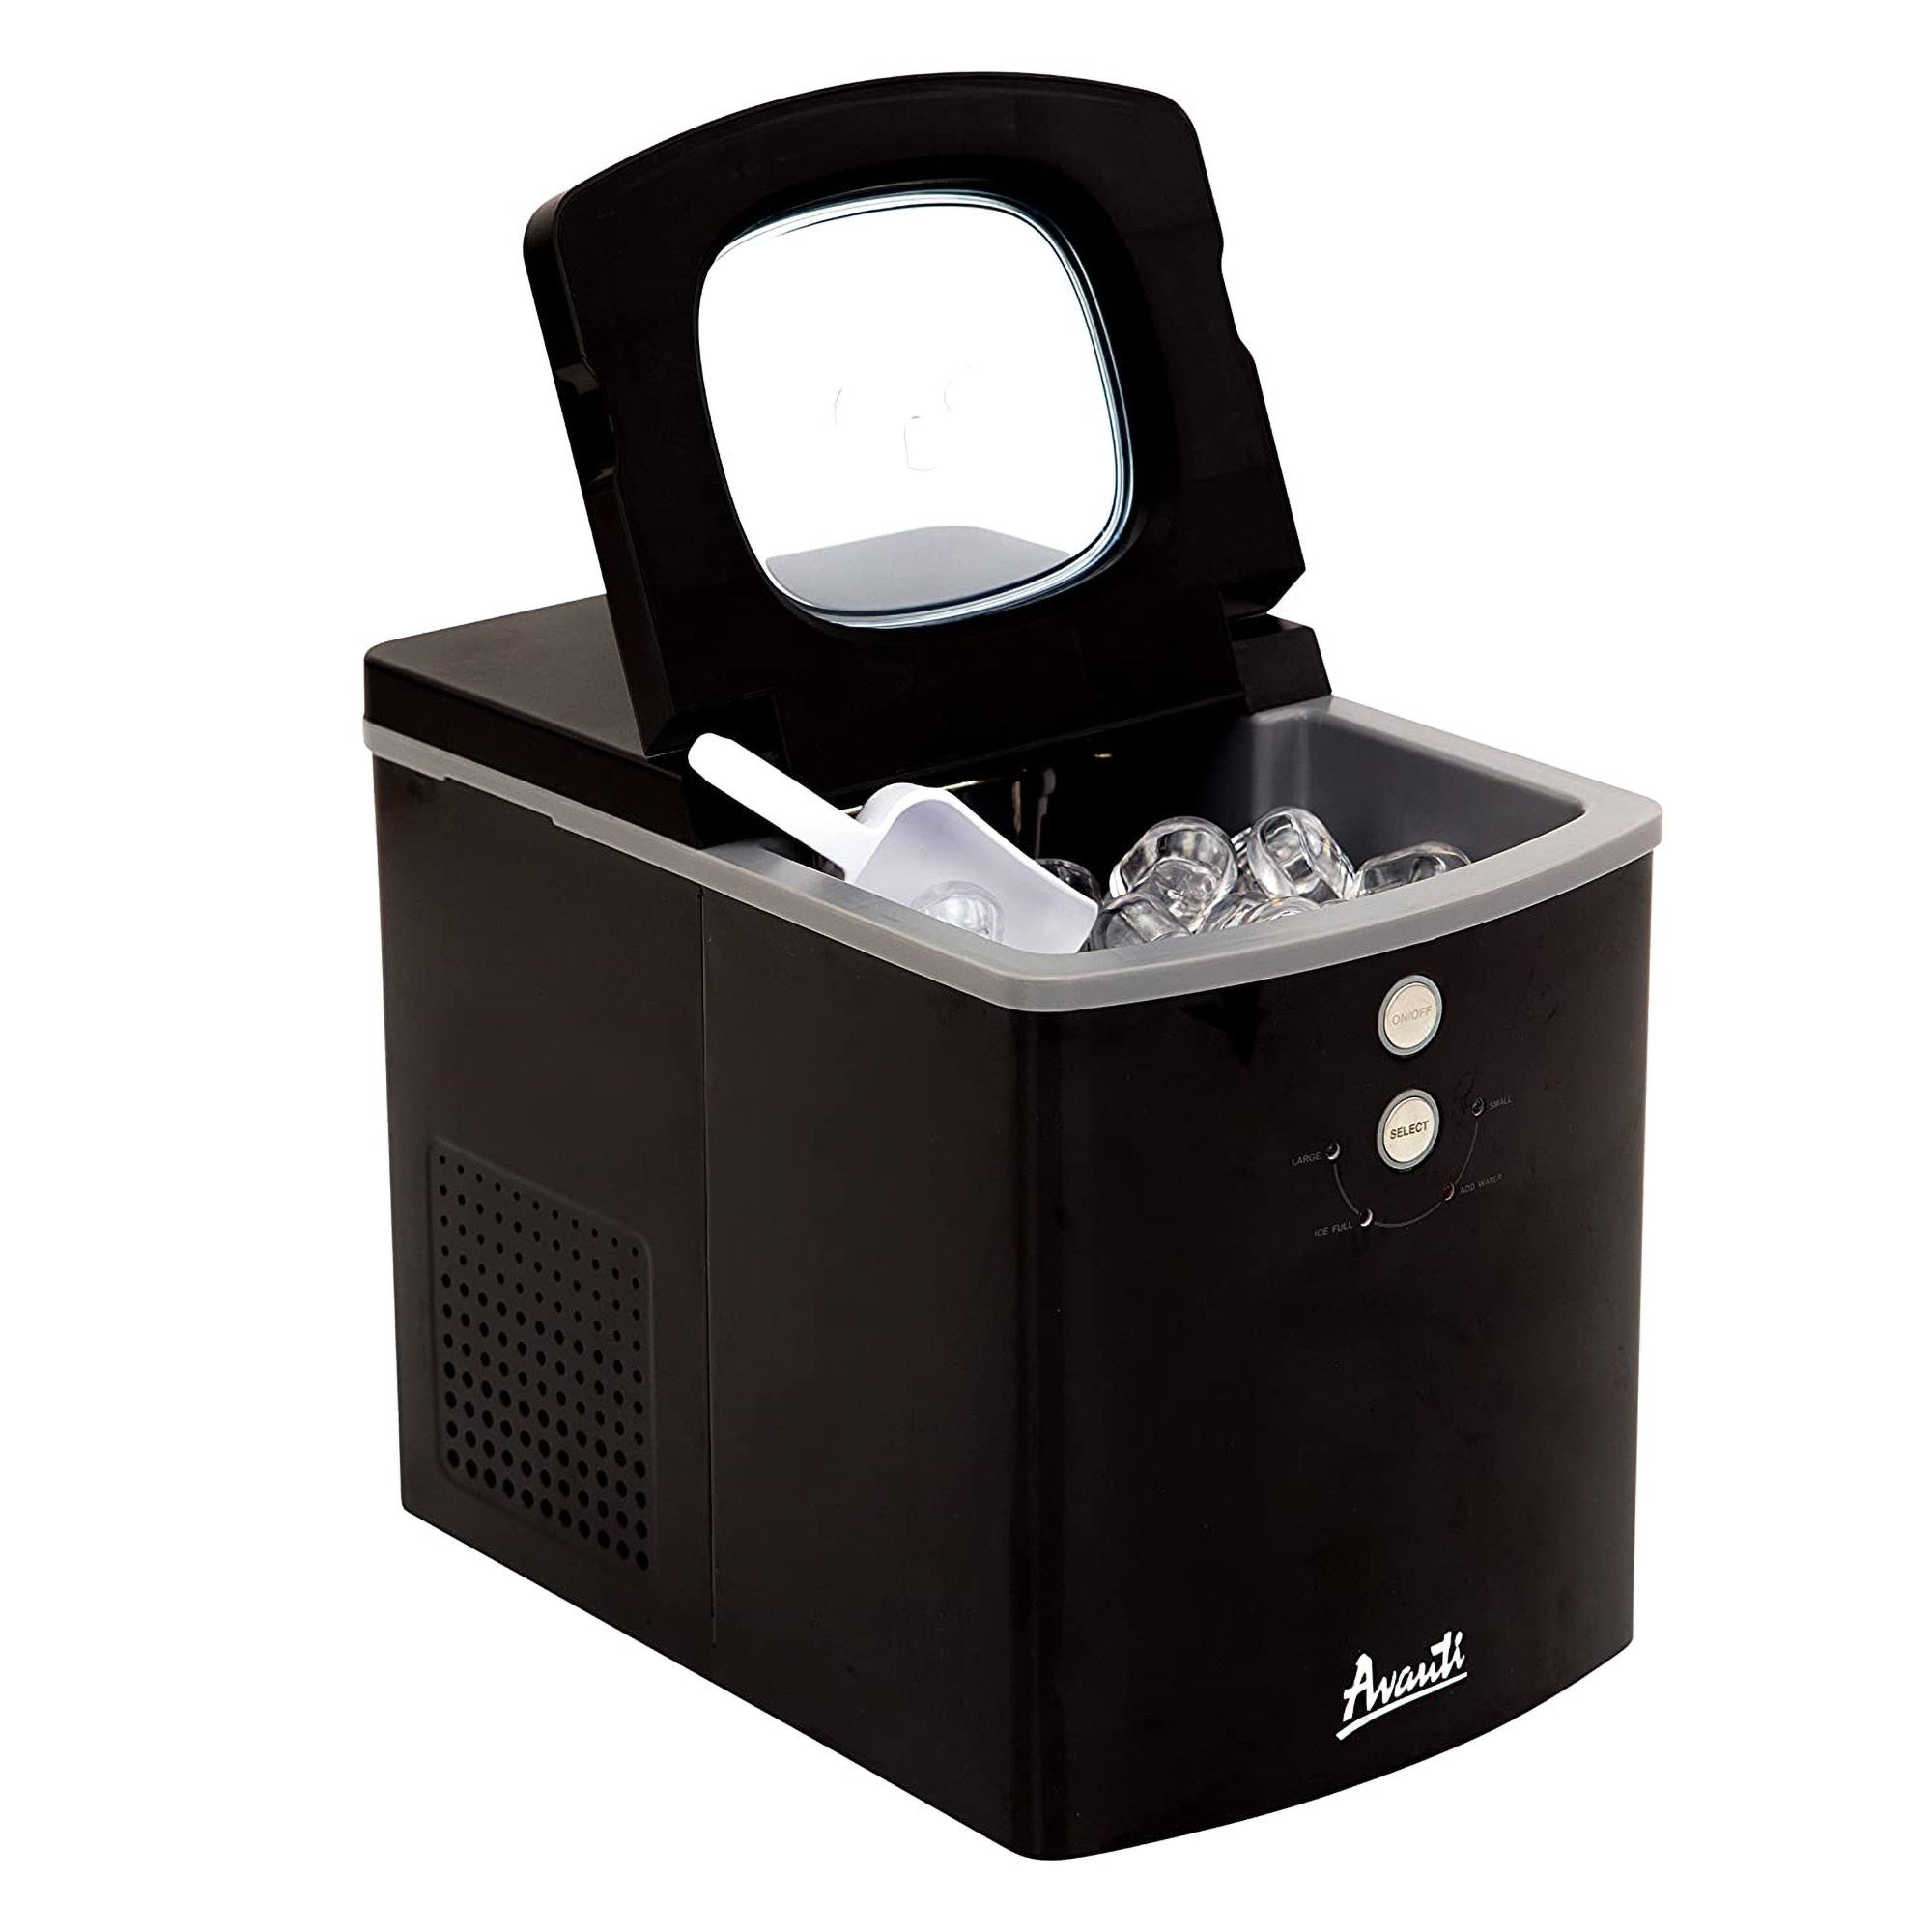 Portable Countertop Ice Maker Black Stainless Steel